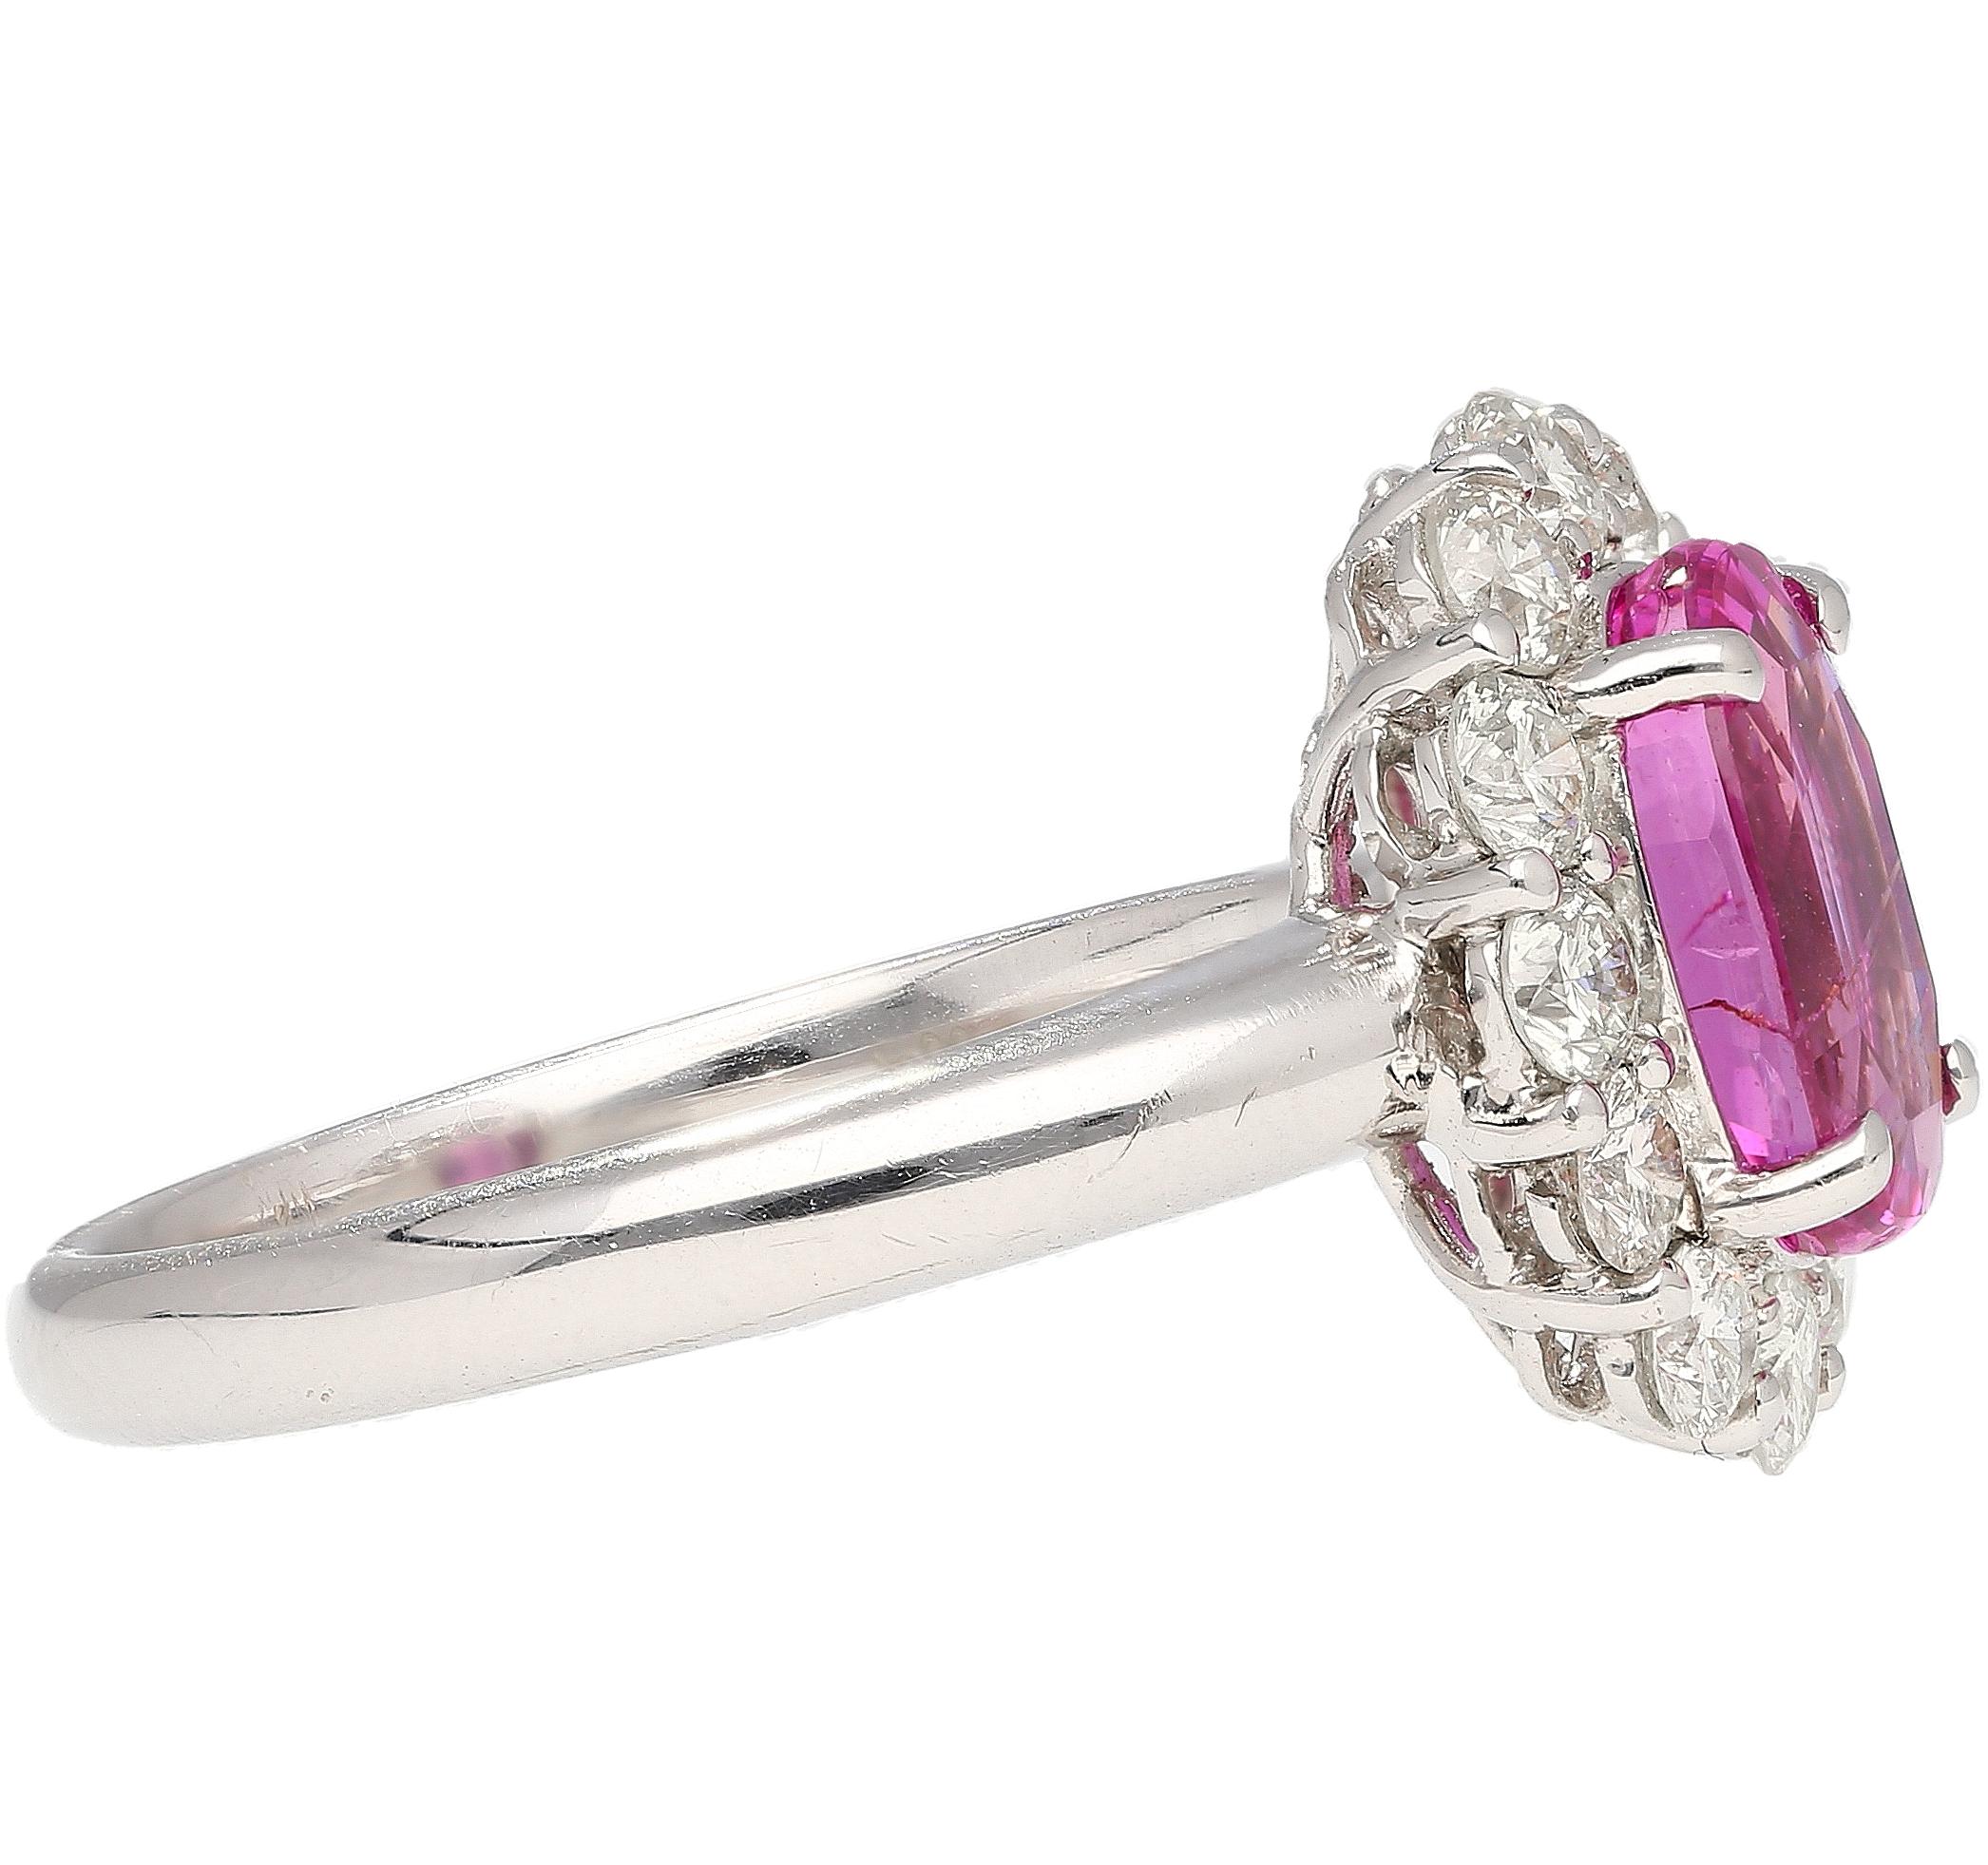 3.96 Carat Oval Cut Pink Sapphire and Diamond Halo Ring in 18k White Gold For Sale 1